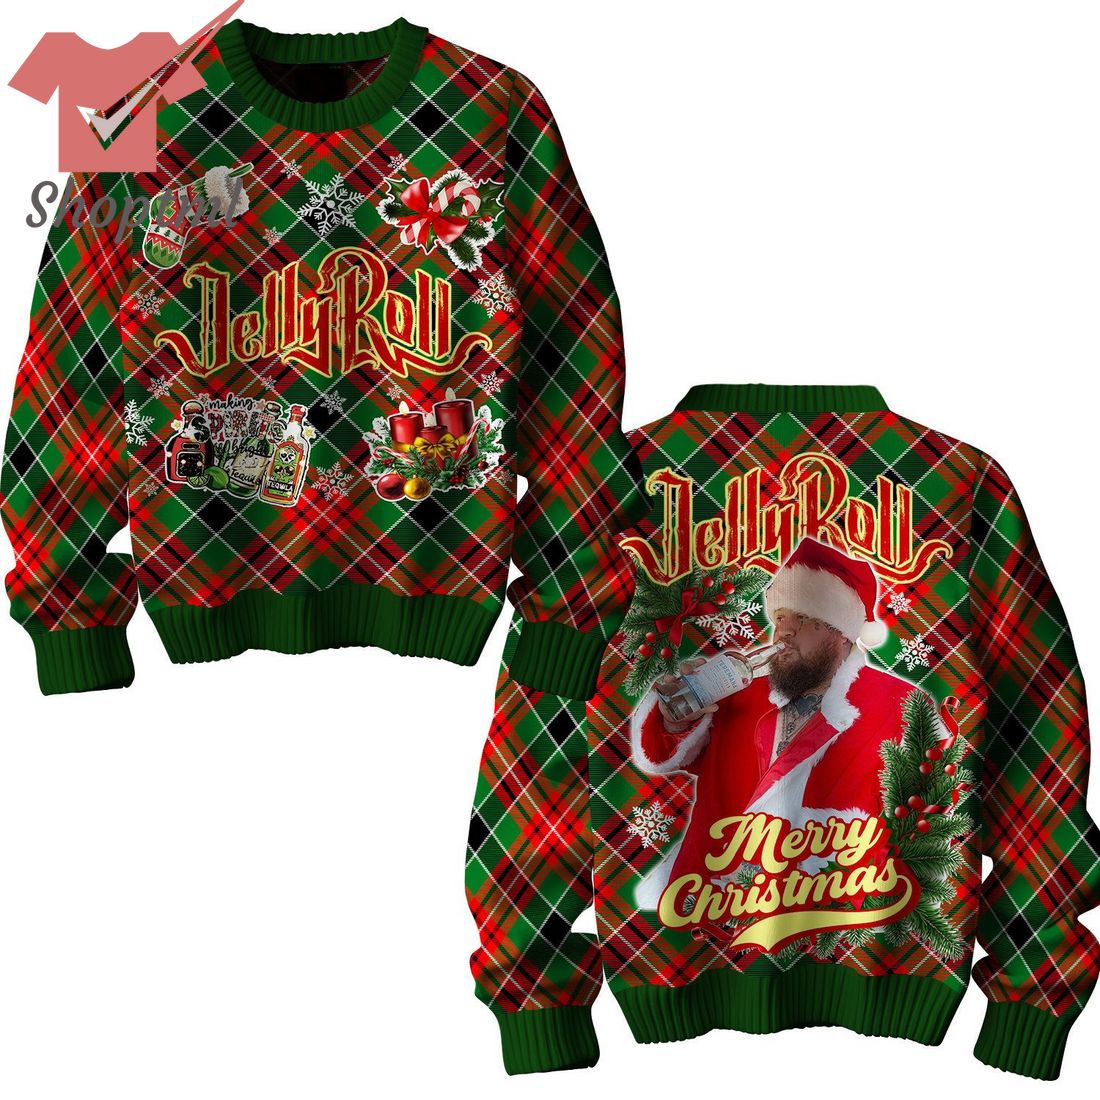 Jelly Roll Rapper Ugly Christmas Sweater